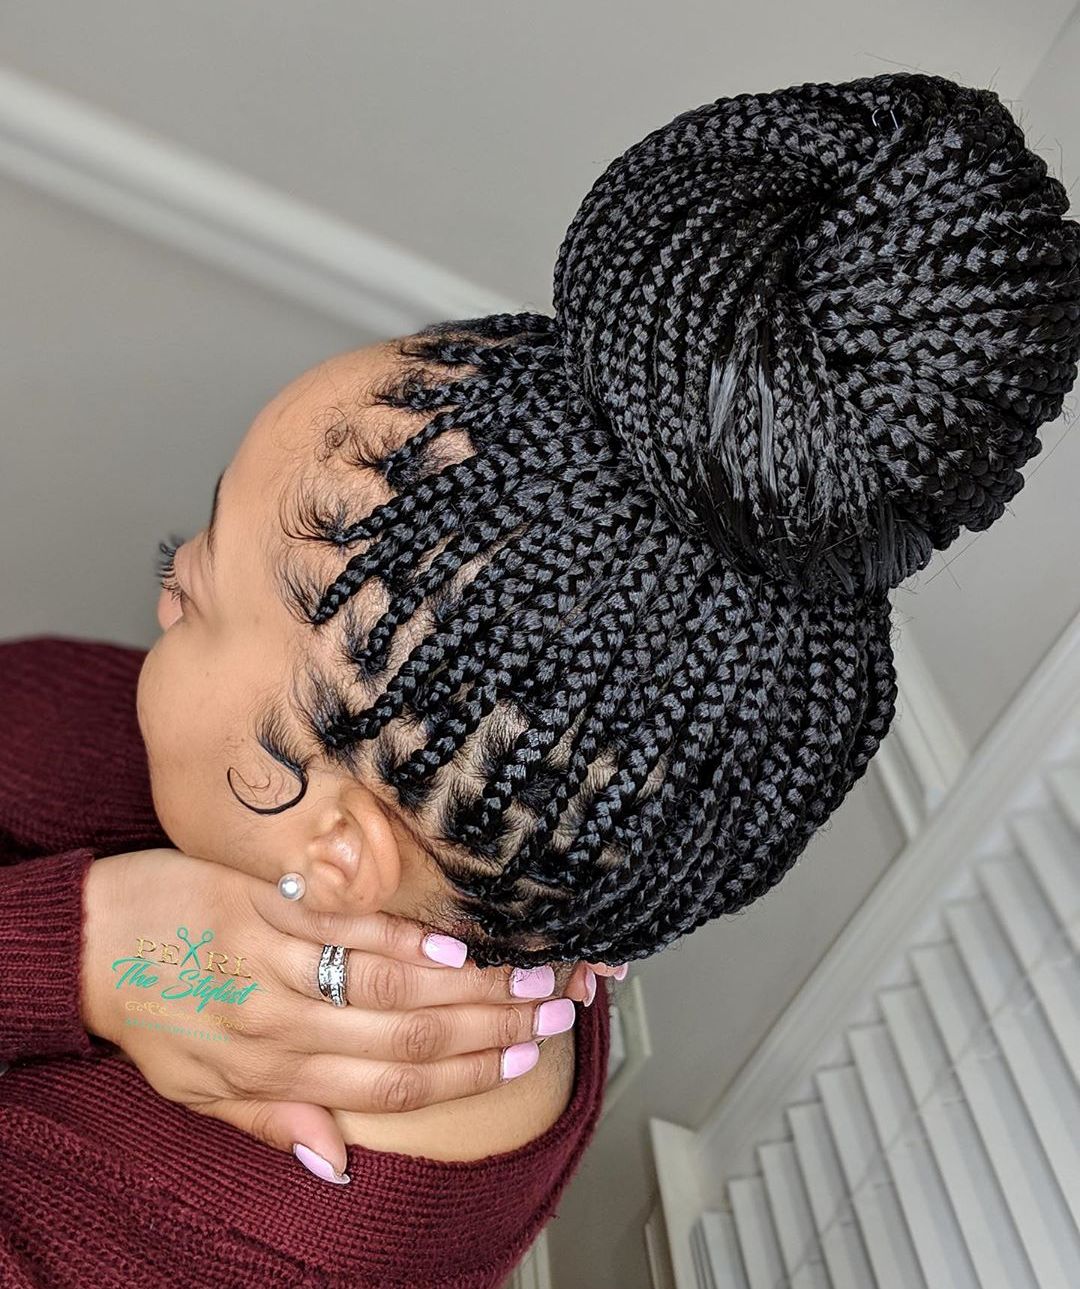 50 Jaw-Dropping Braided Hairstyles to Try in 2023 - Hair Adviser | Goddess braids  hairstyles, Feed in braids hairstyles, Hair styles